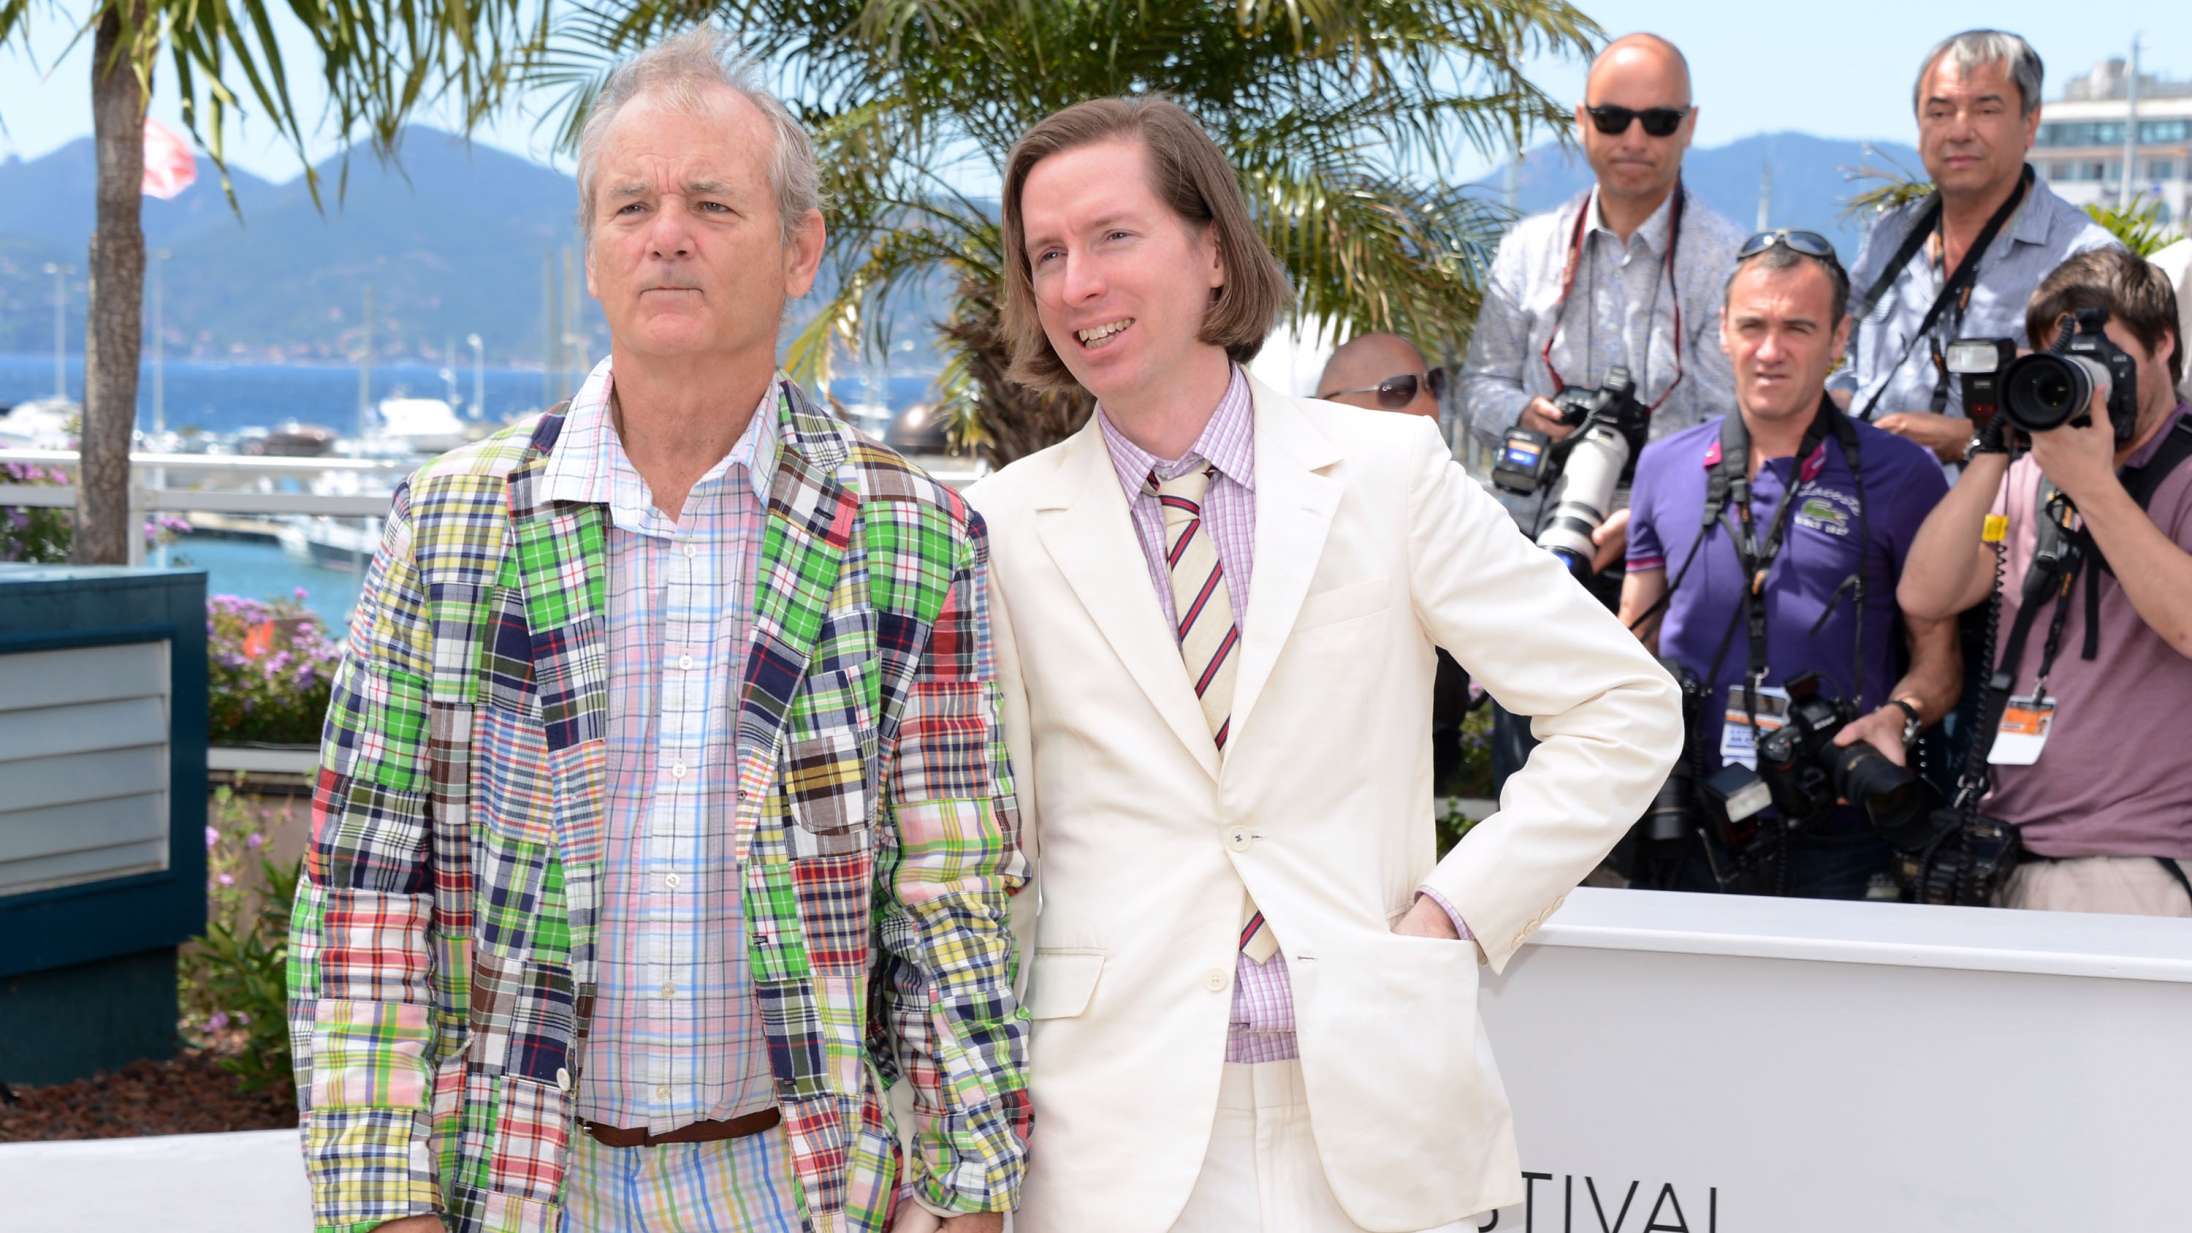 Wes Anderson forsvarer Bill Murray trods chikaneanklager